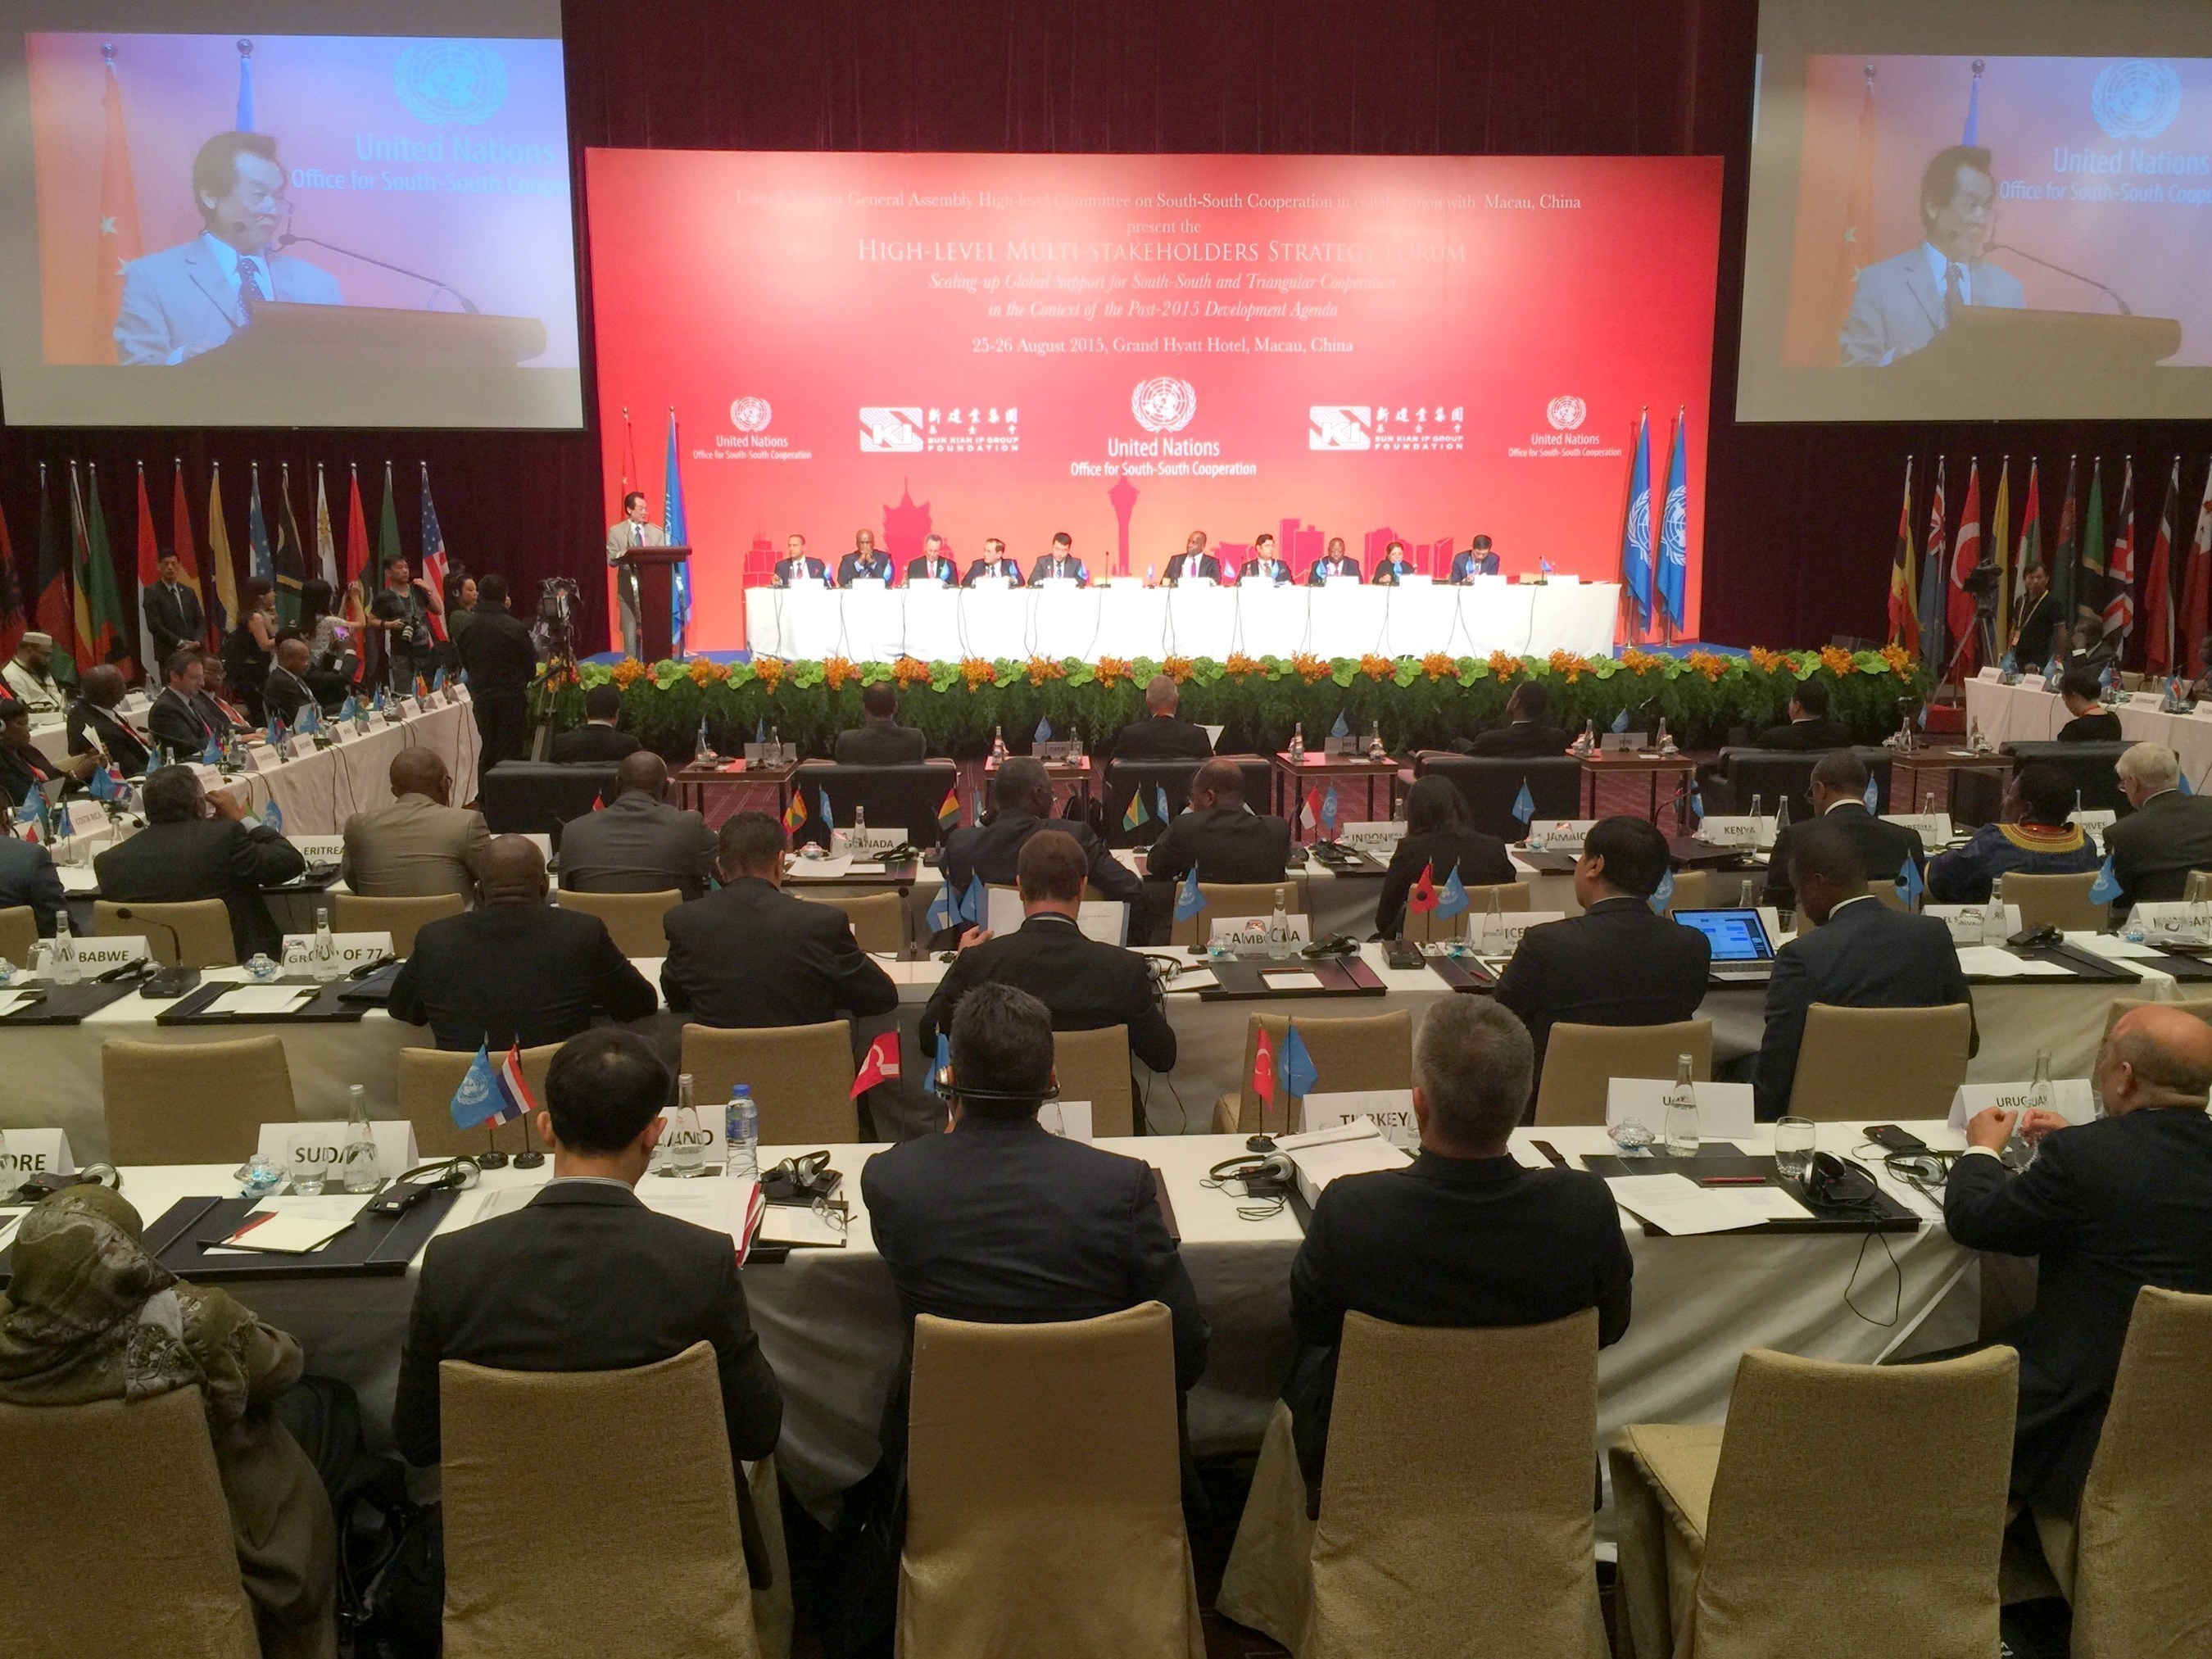 Yiping Zhou, Director of the United Nations Office for South-South Cooperation, speaks at the opening of the High-Level Multi-Stakeholders Strategy Forum in Macau, China.